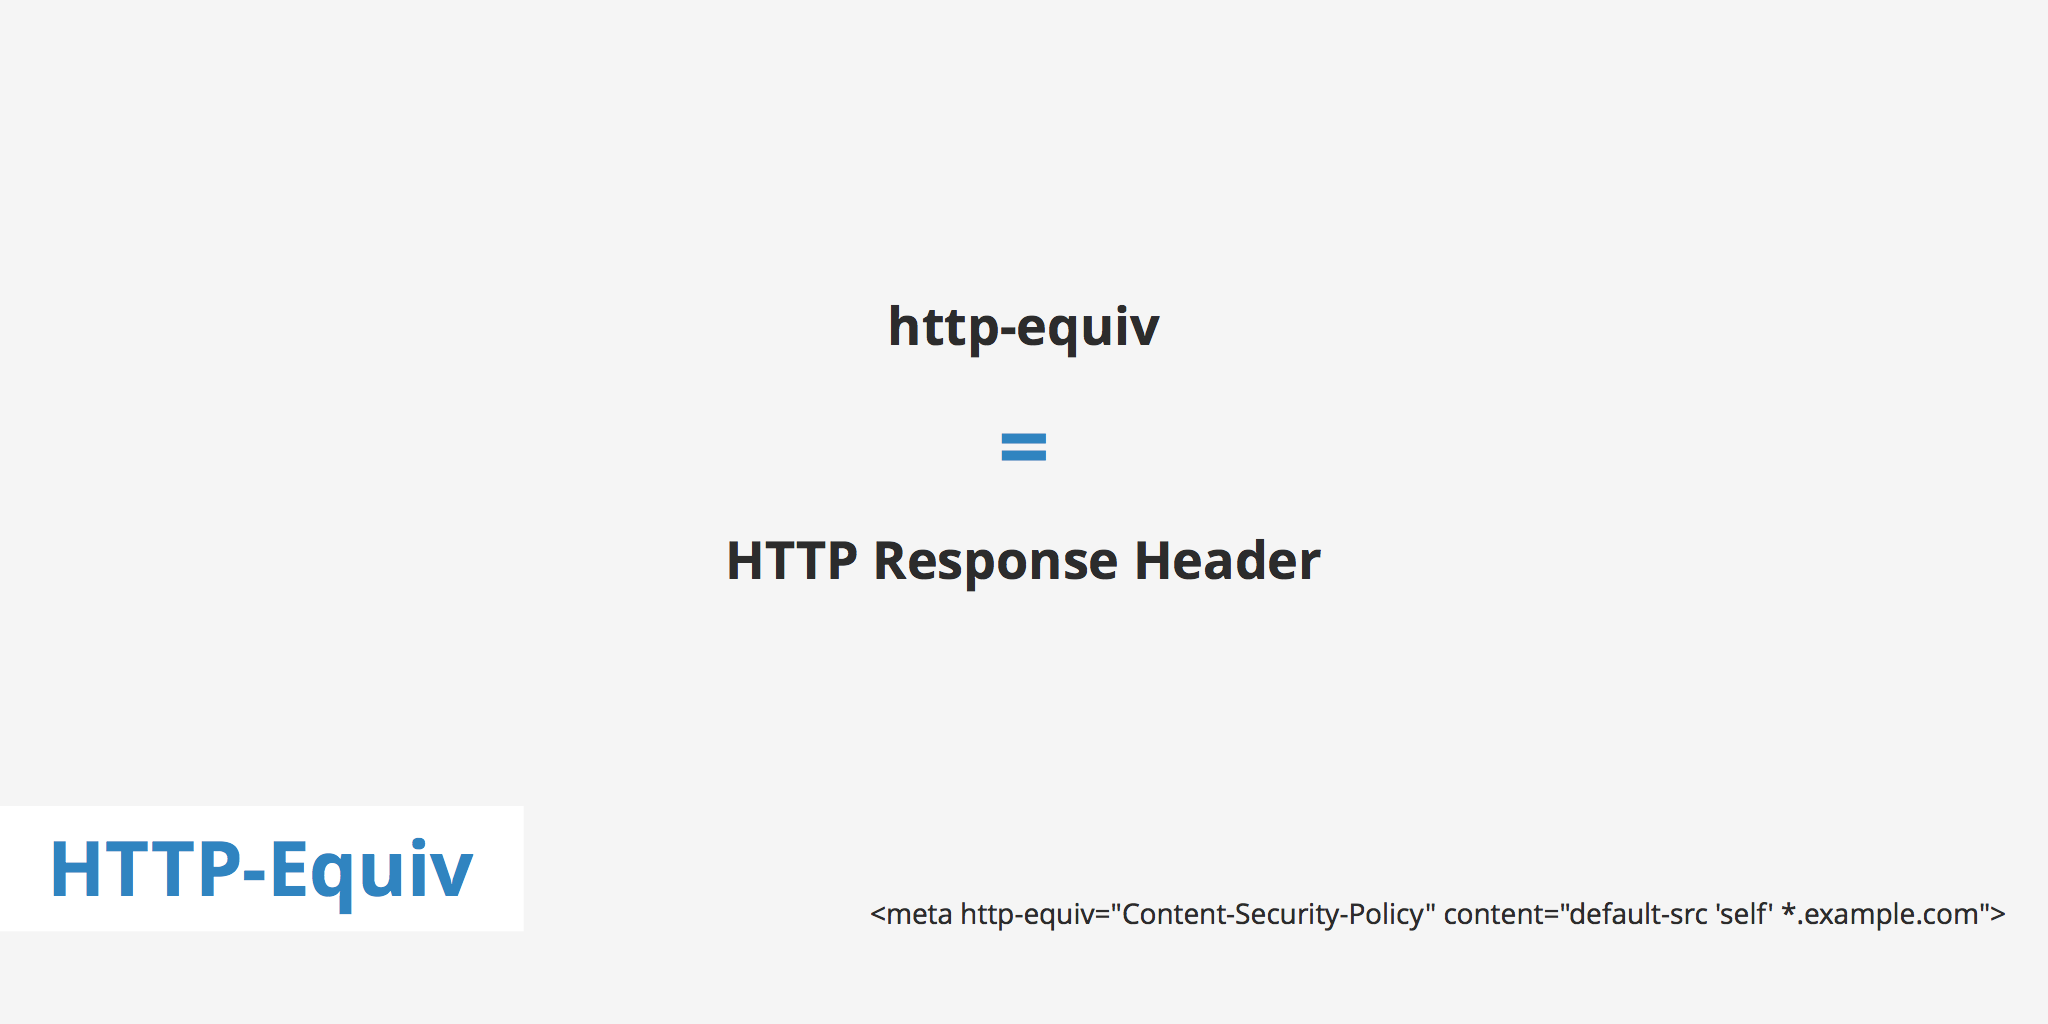 HTTP-Equiv: What Is It Used For?